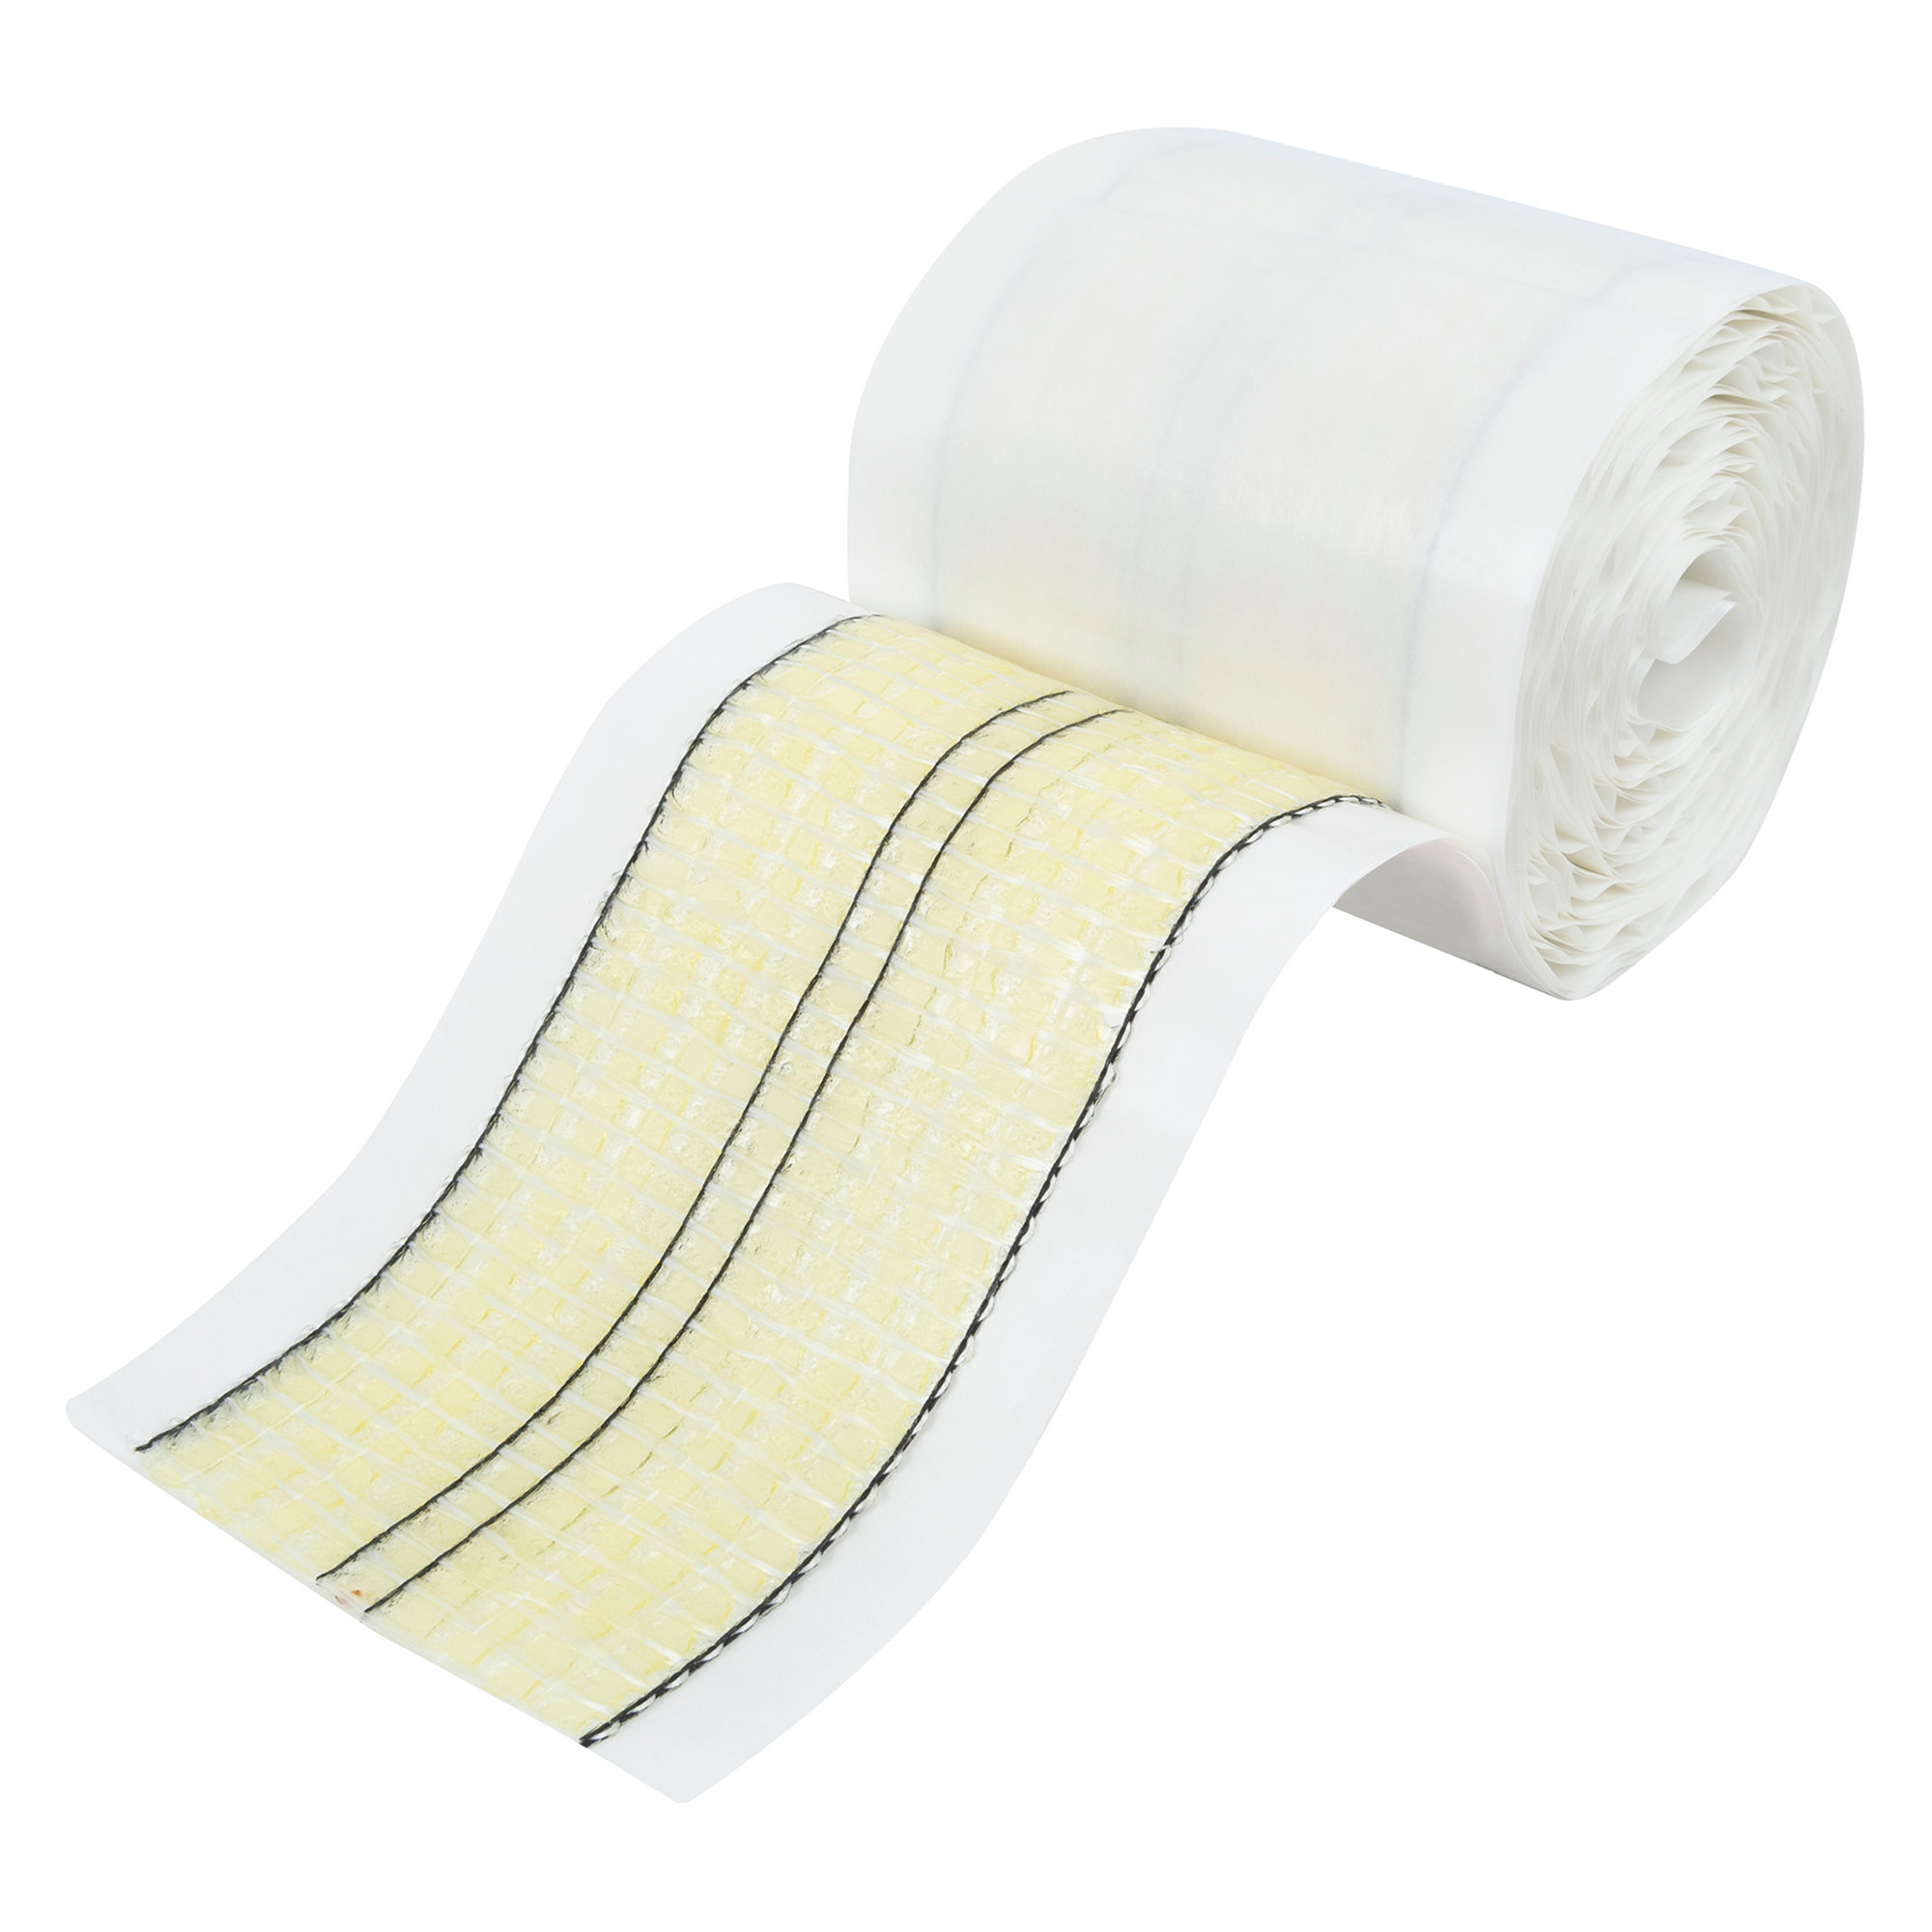 Saves Nails Double-sided Adhesive Tape. ​Extra strong double sided,  water-resistant adhesive tape for interior or exterior use.